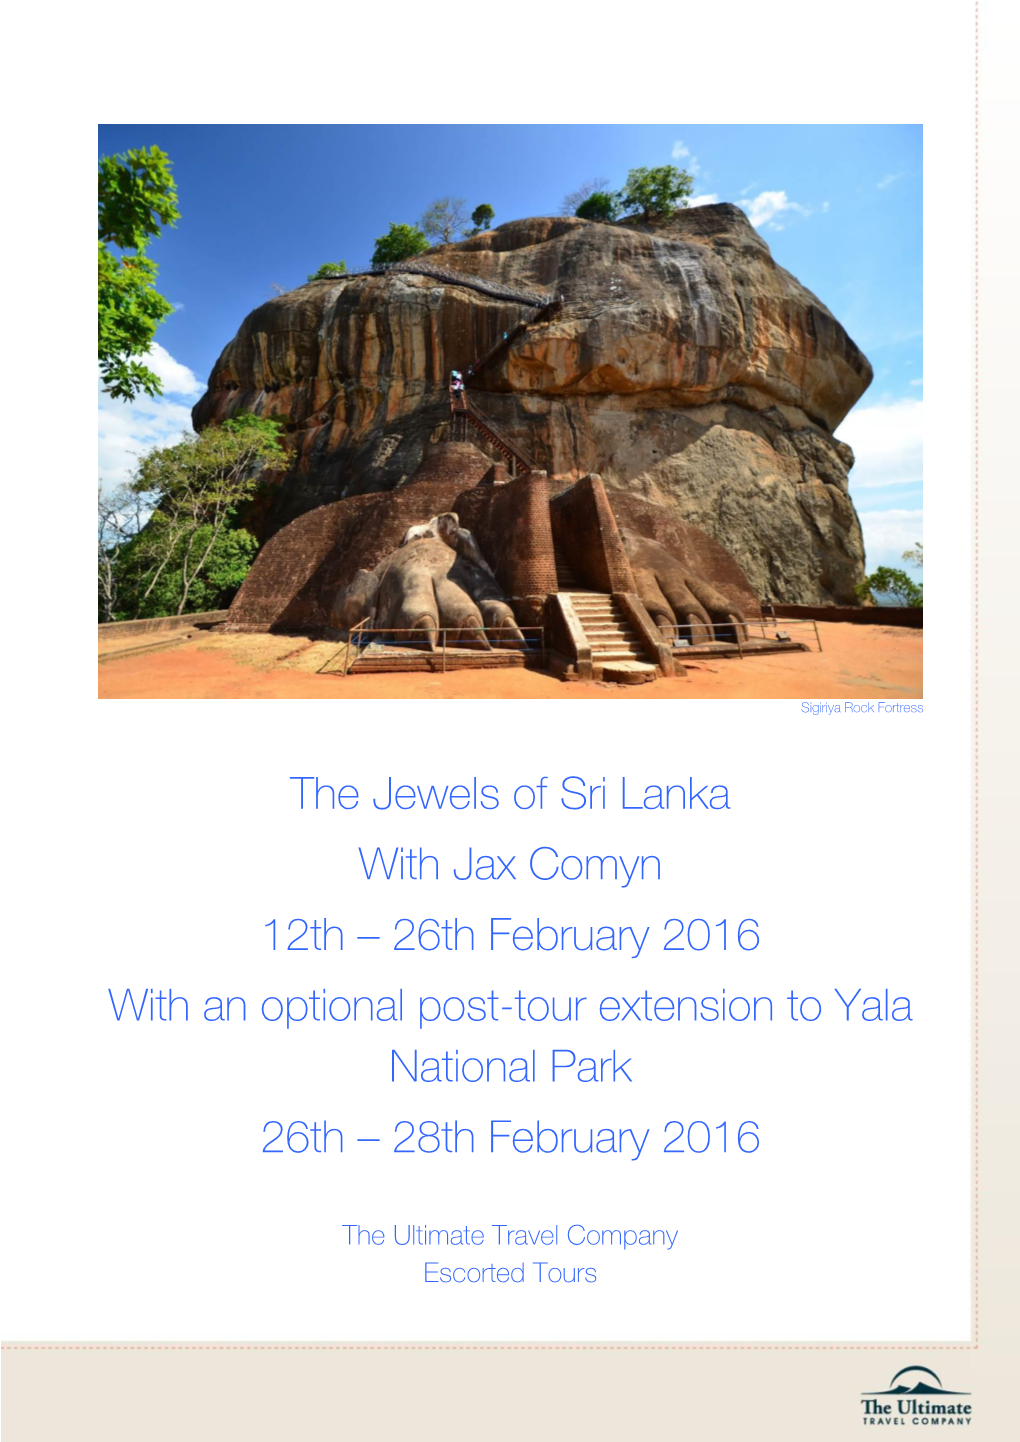 The Jewels of Sri Lanka with Jax Comyn 12Th – 26Th February 2016 with an Optional Post-Tour Extension to Yala National Park 26Th – 28Th February 2016